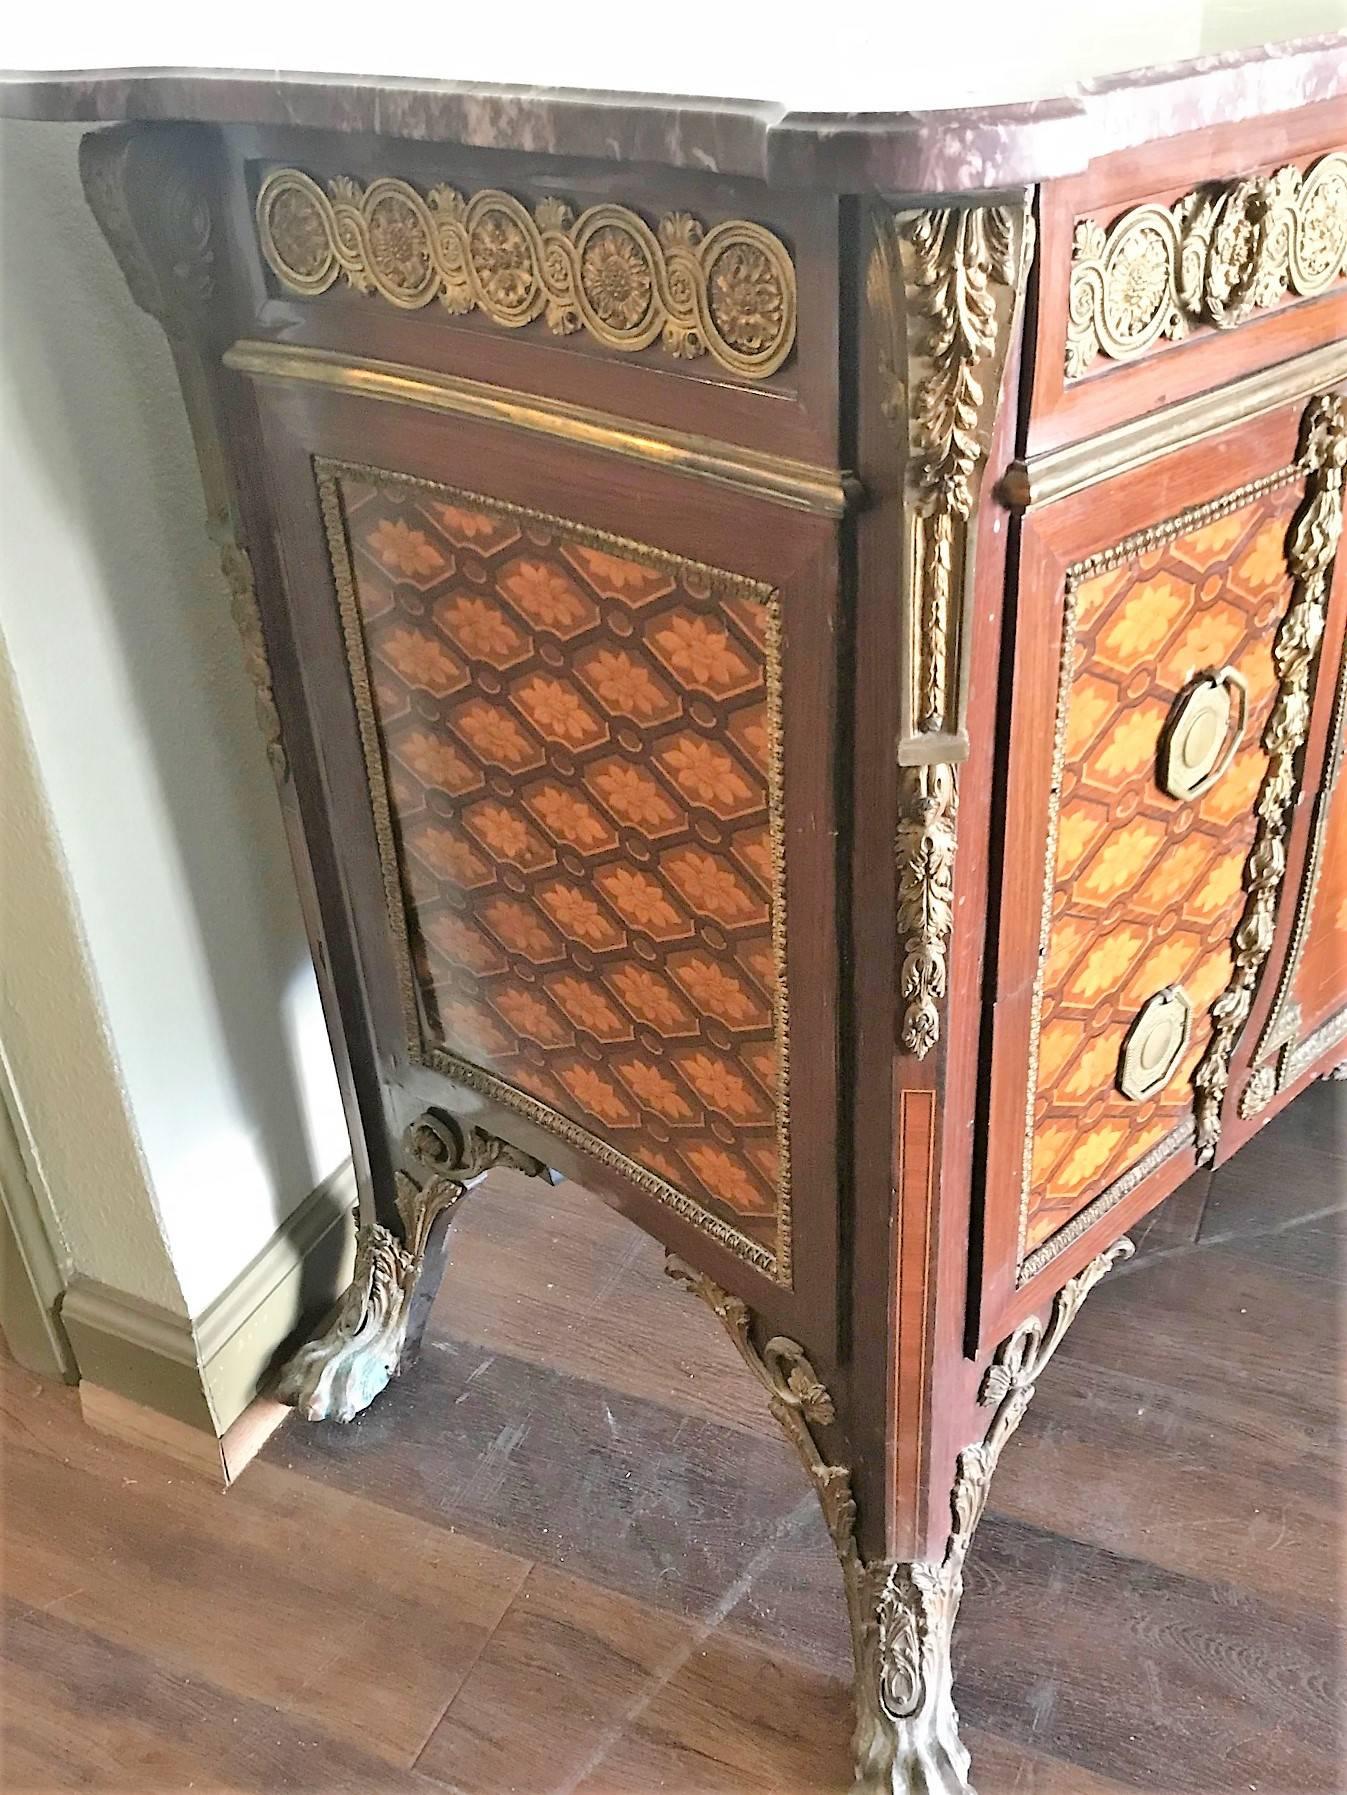 Superb circa 1930s French transitional style commode with a shaped marble-top.

The frieze ornately decorated with gold-gilded bronze leaf scrolls above a central panel with marquetry inlays of exotic woods depicting a large urn with flowers and